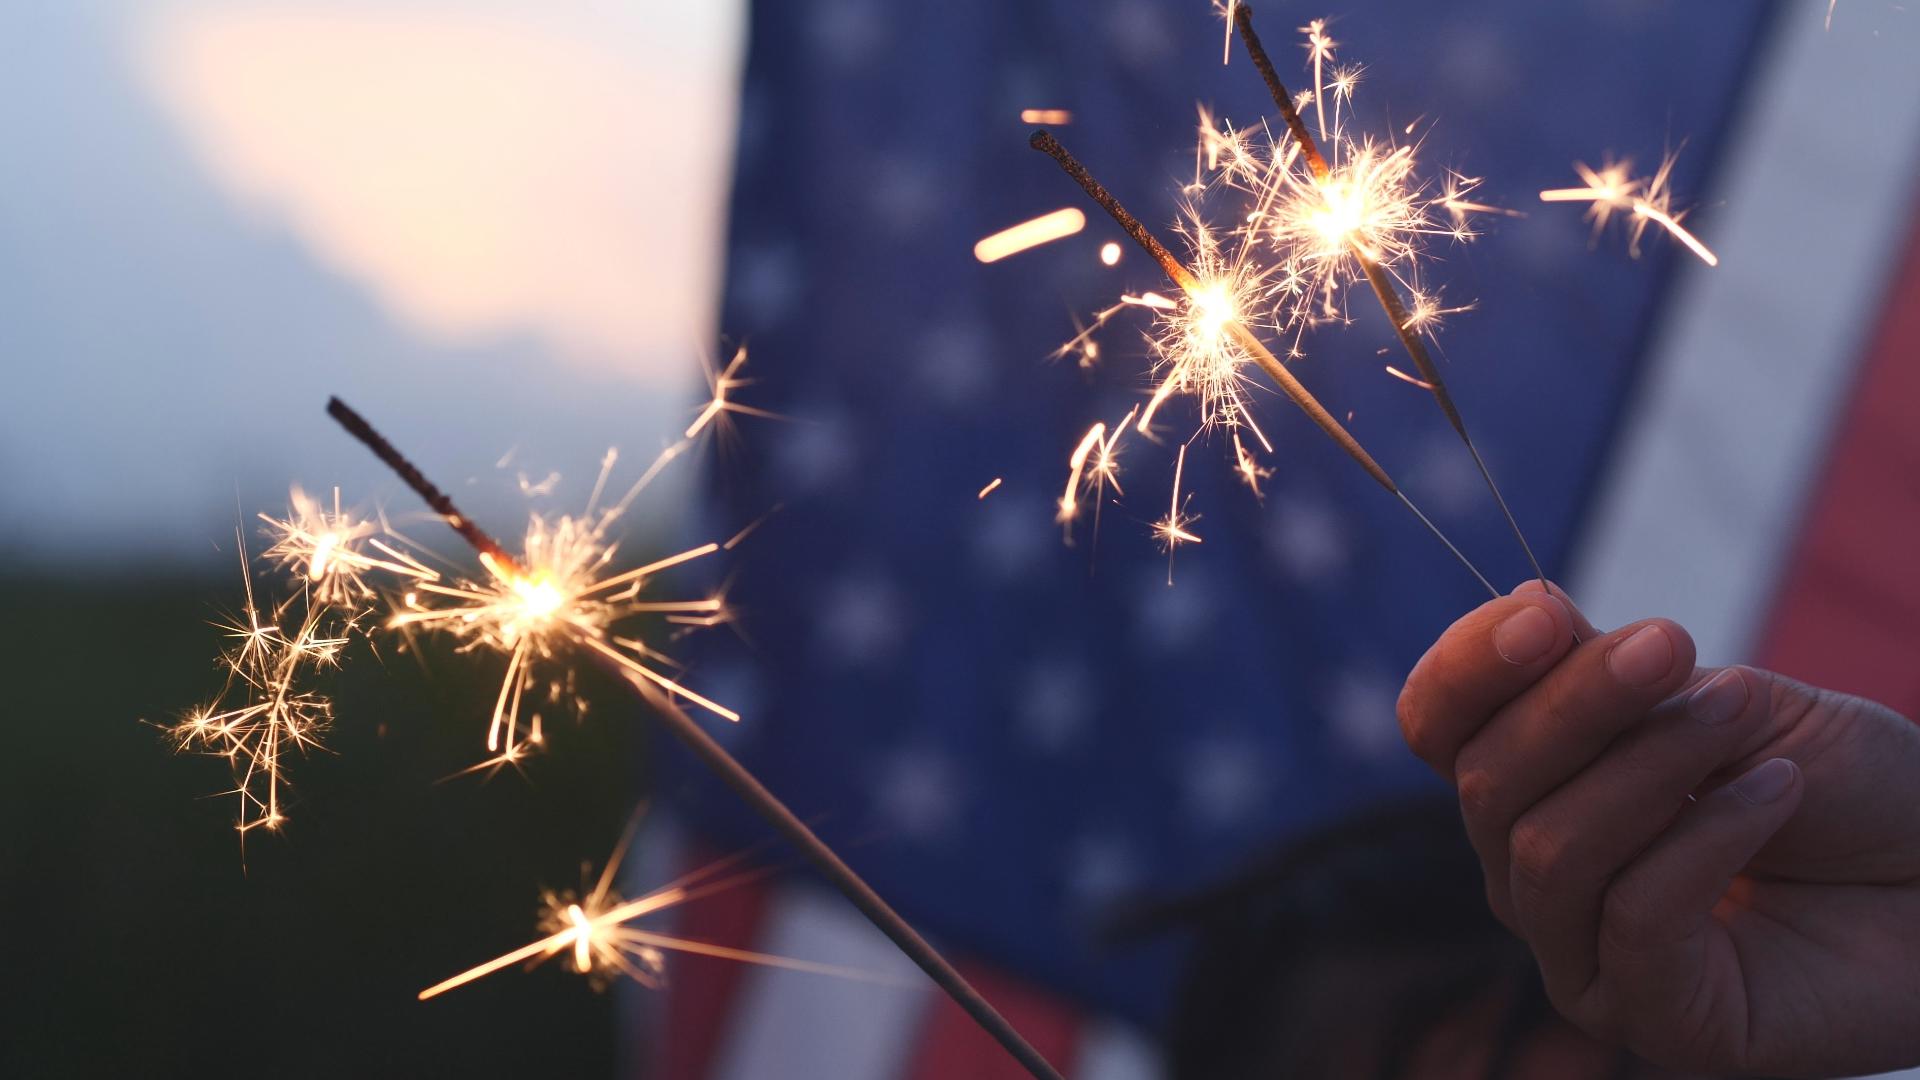 2WTK looks into the history of fireworks this Independence Day.